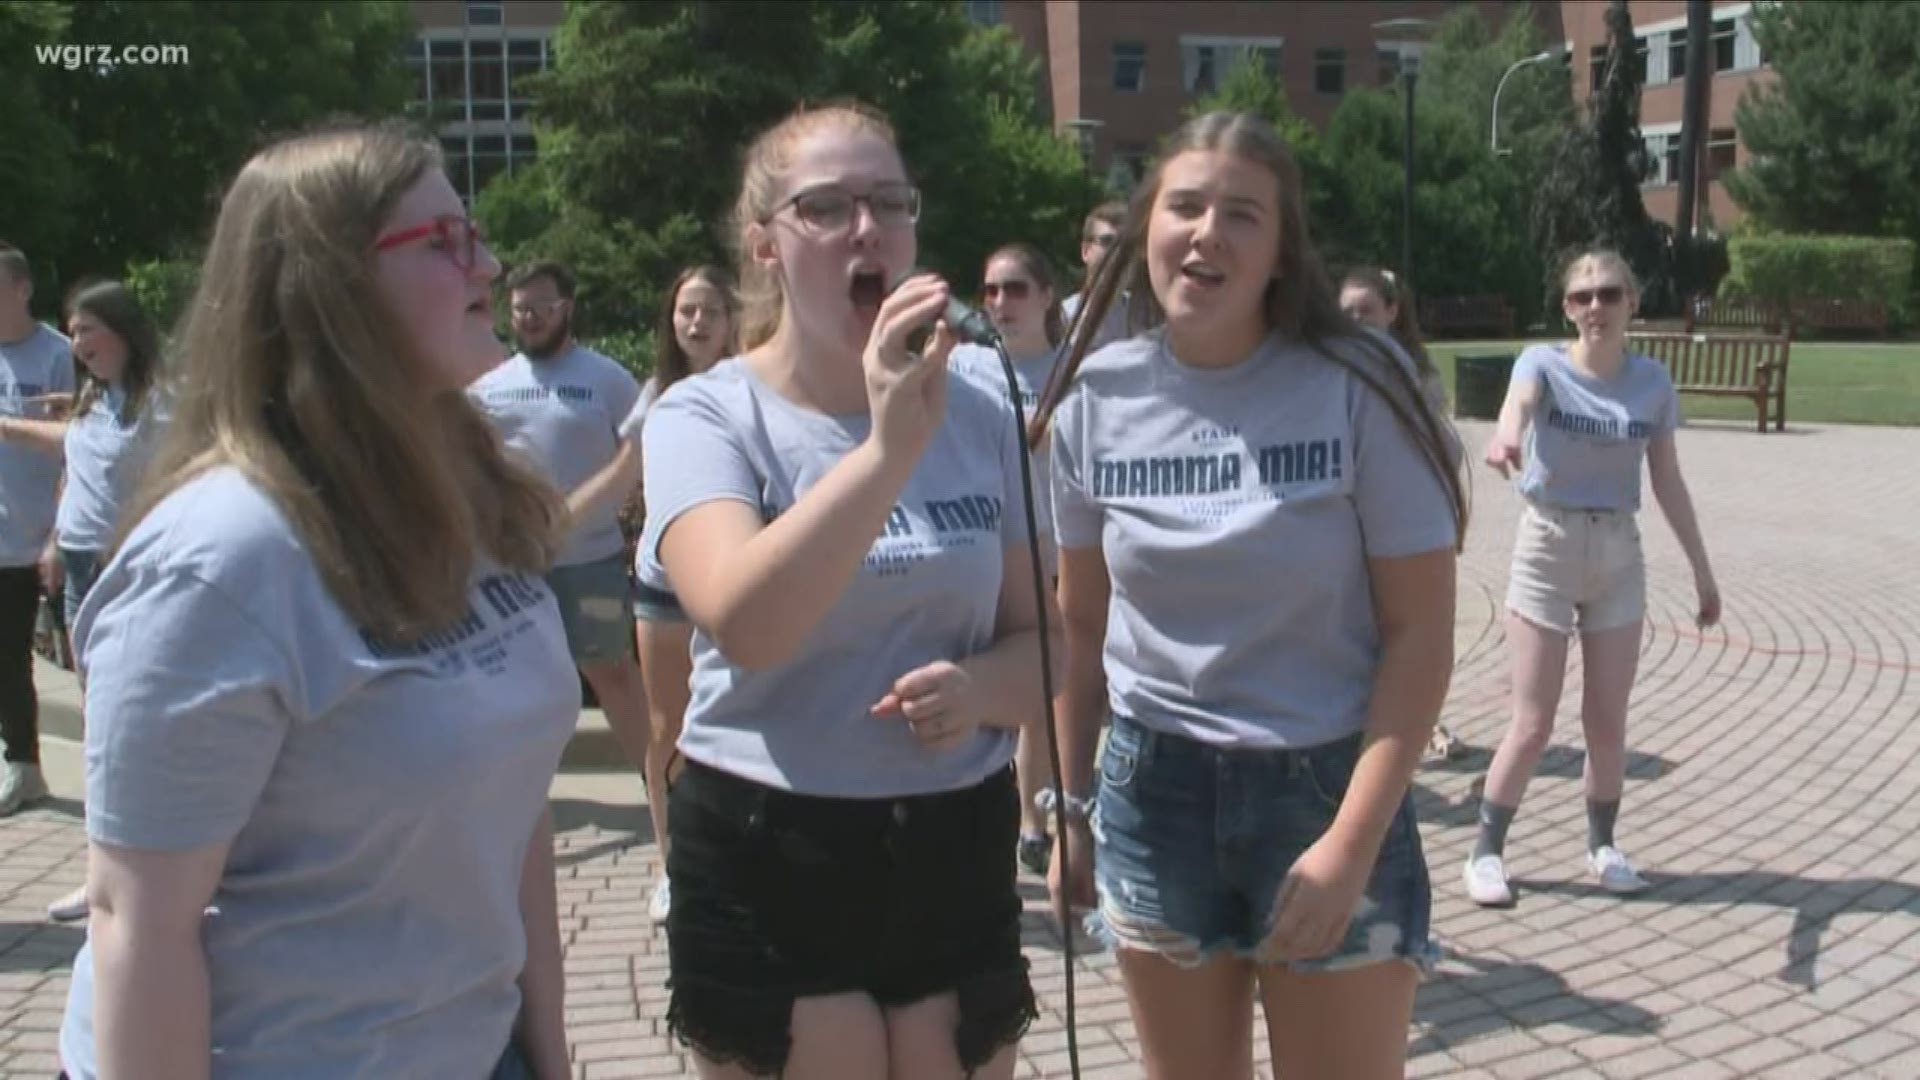 Patients and visitors at Roswell Park were treated to a flash mob of music and dance.